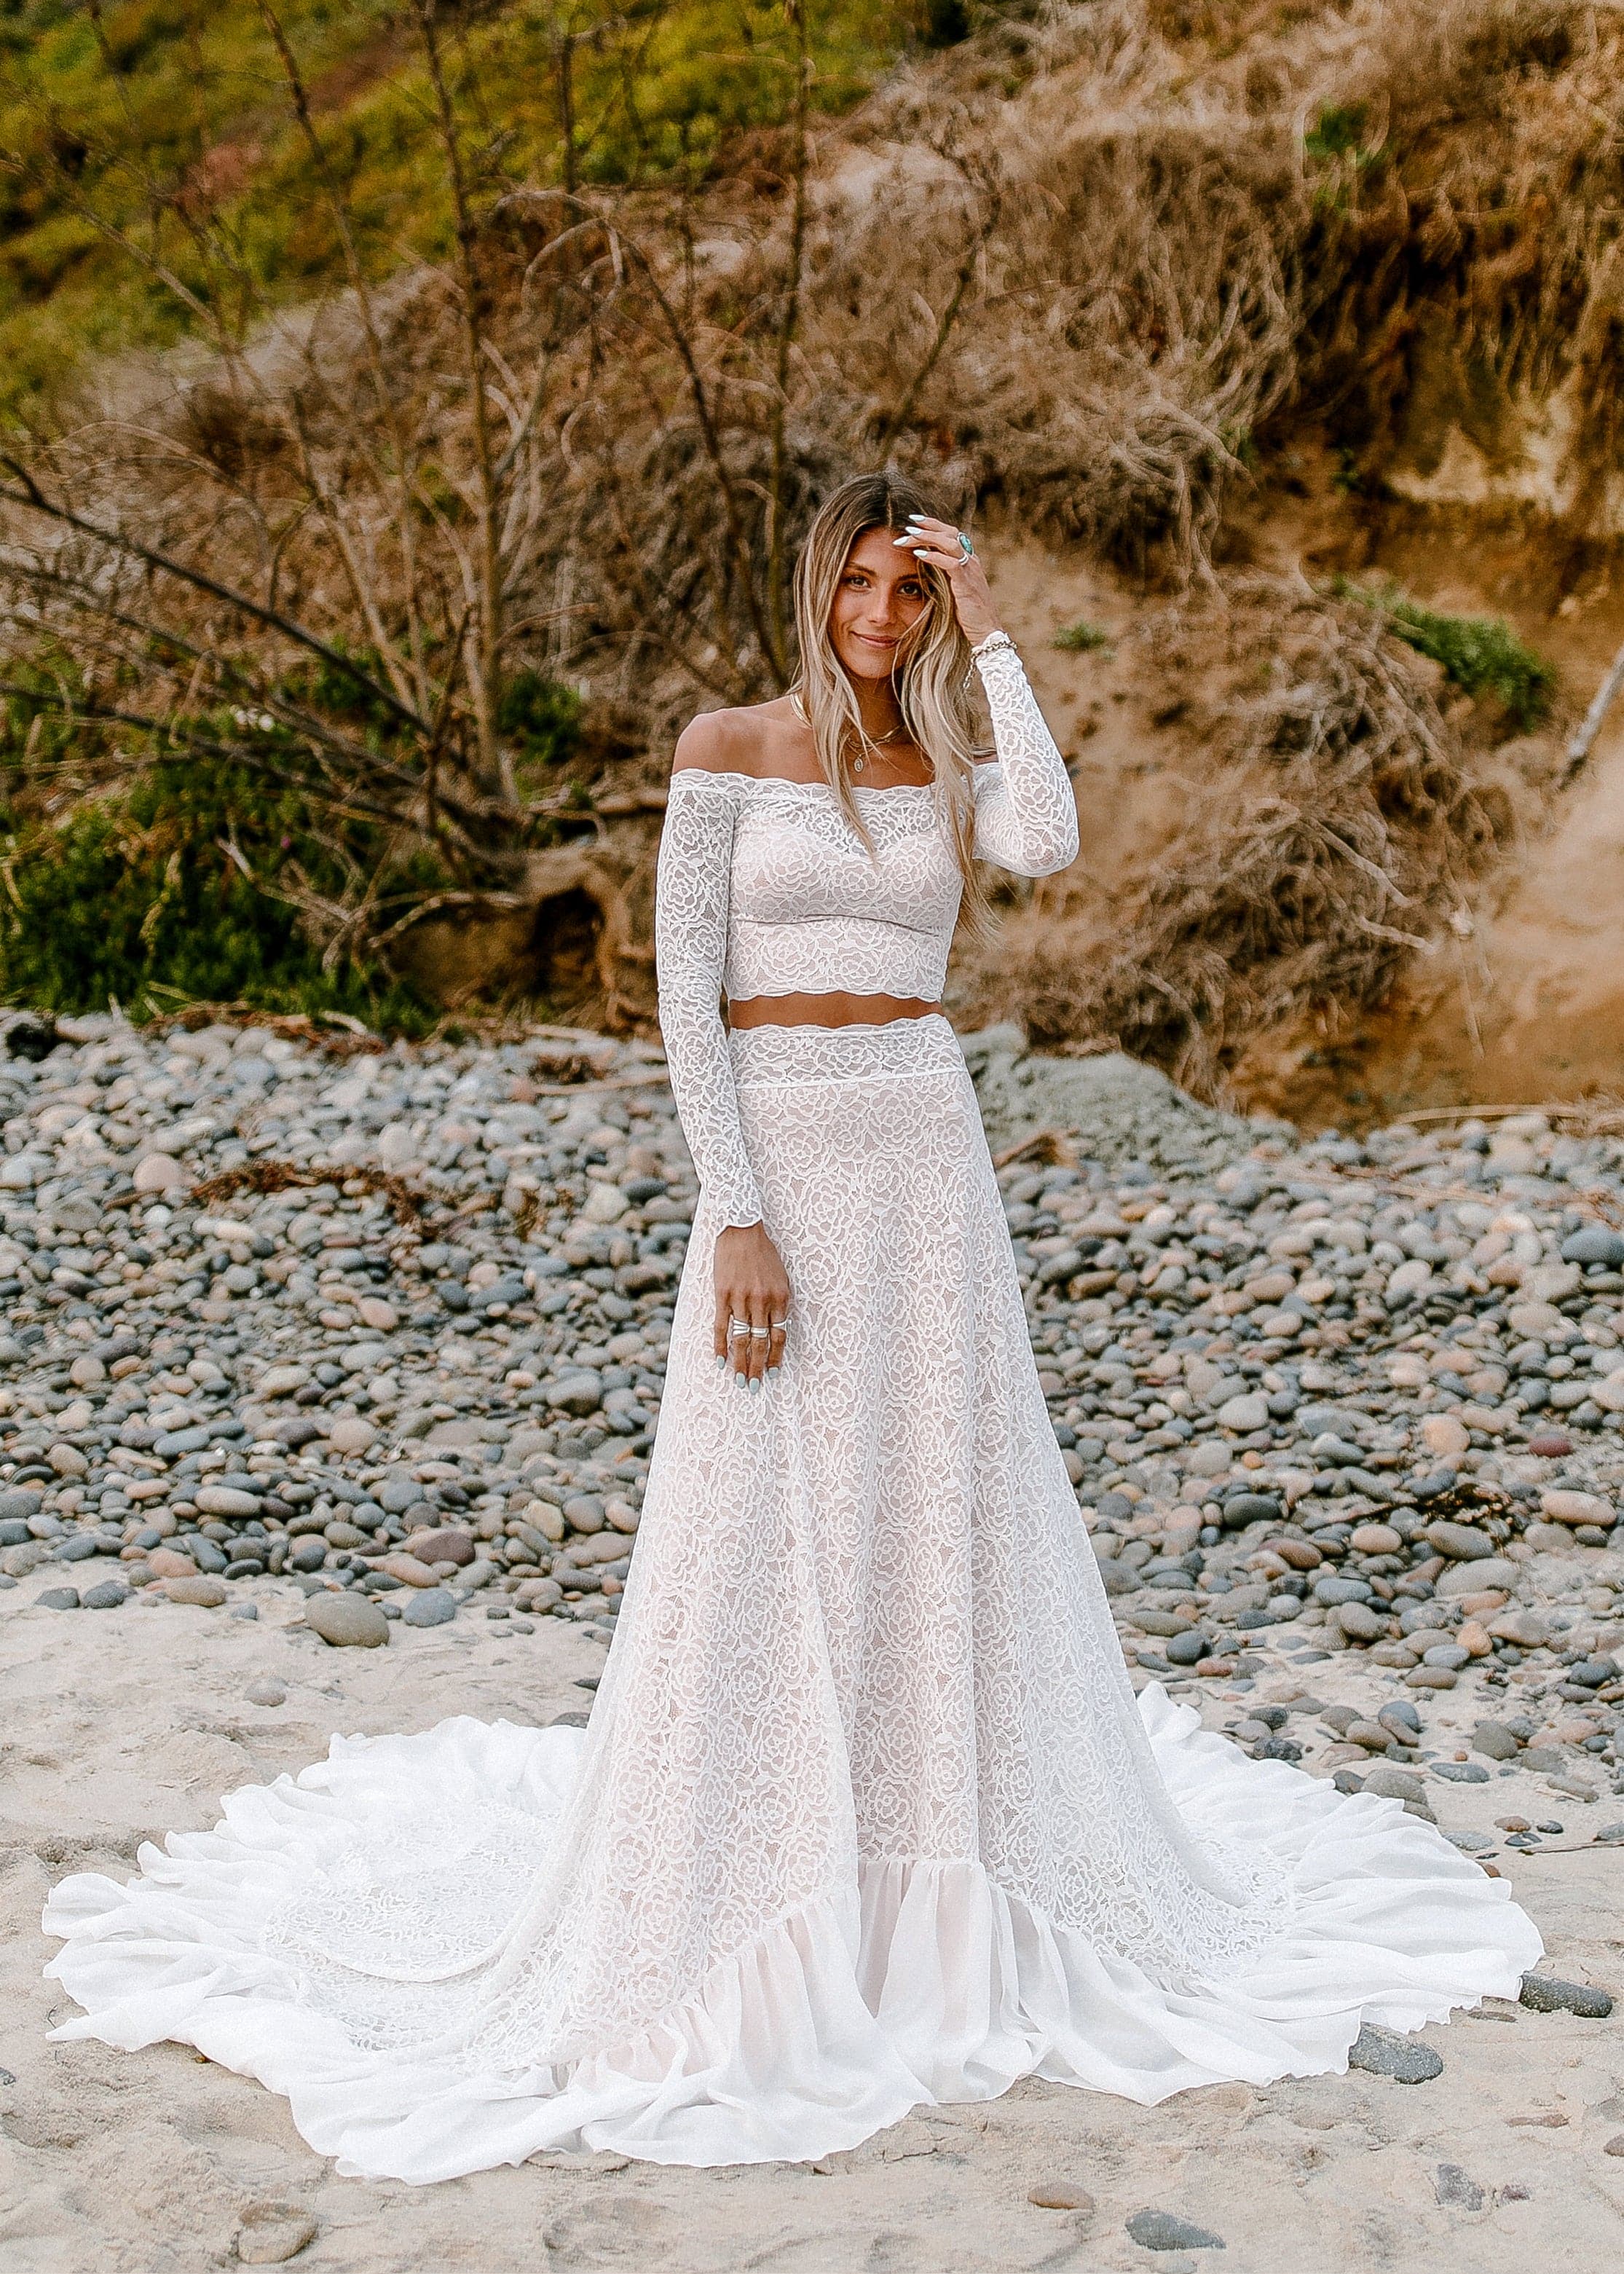 Wedding Gown Guide: Crop Top – The FashionBrides